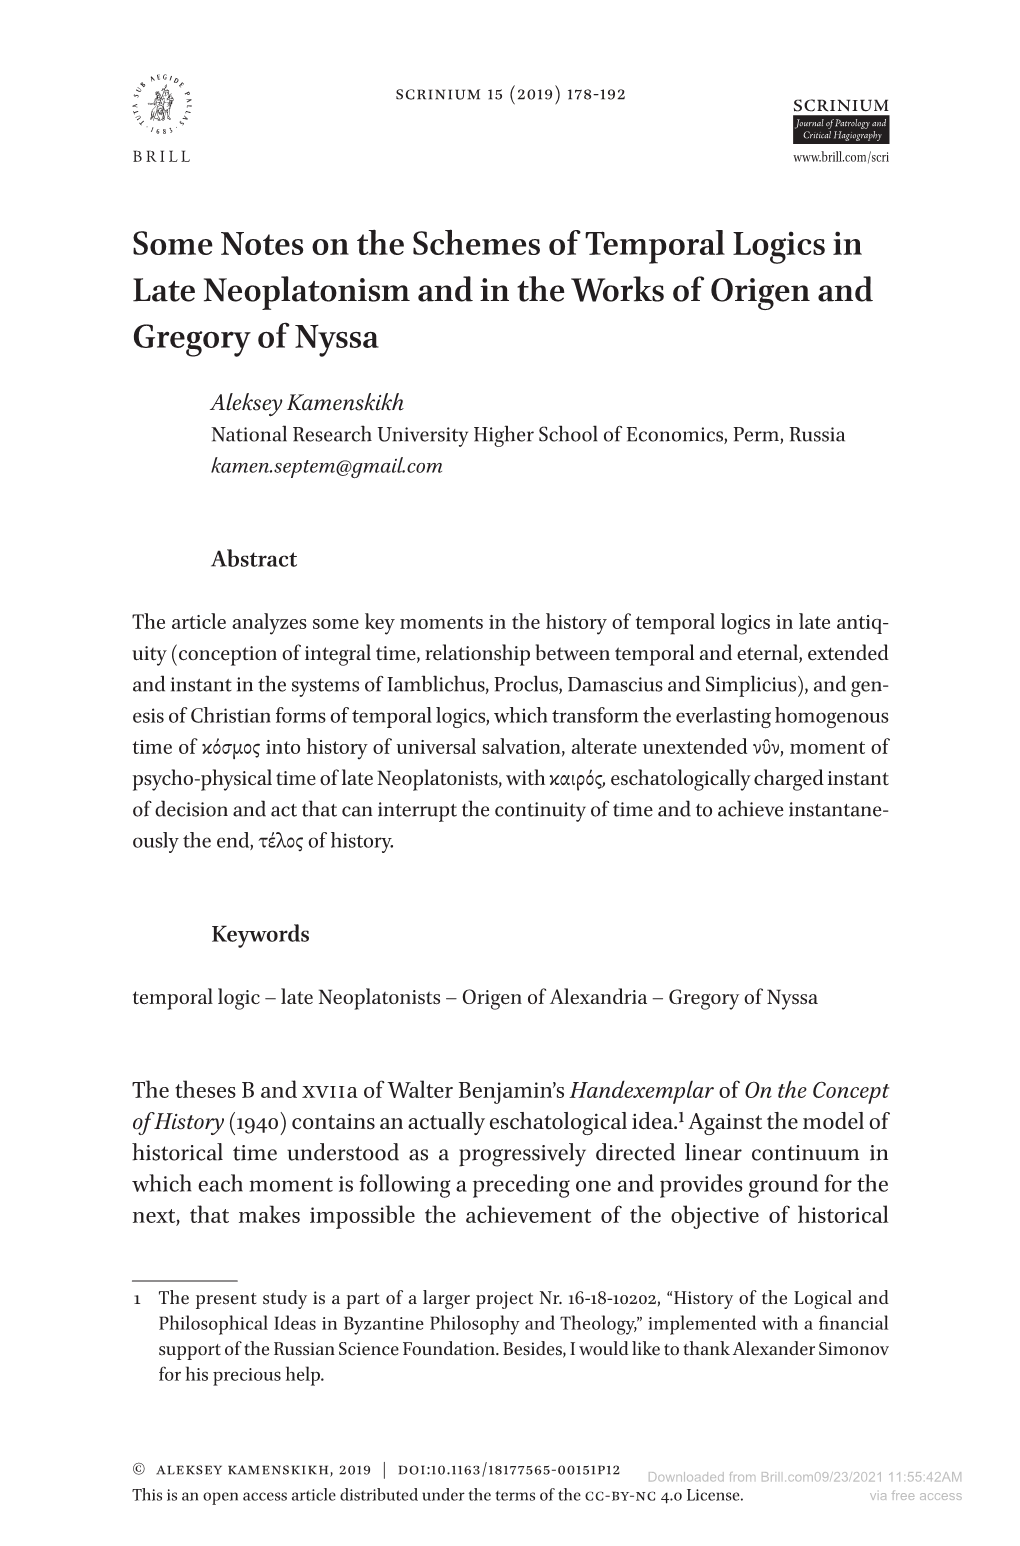 Some Notes on the Schemes of Temporal Logics in Late Neoplatonism and in the Works of Origen and Gregory of Nyssa